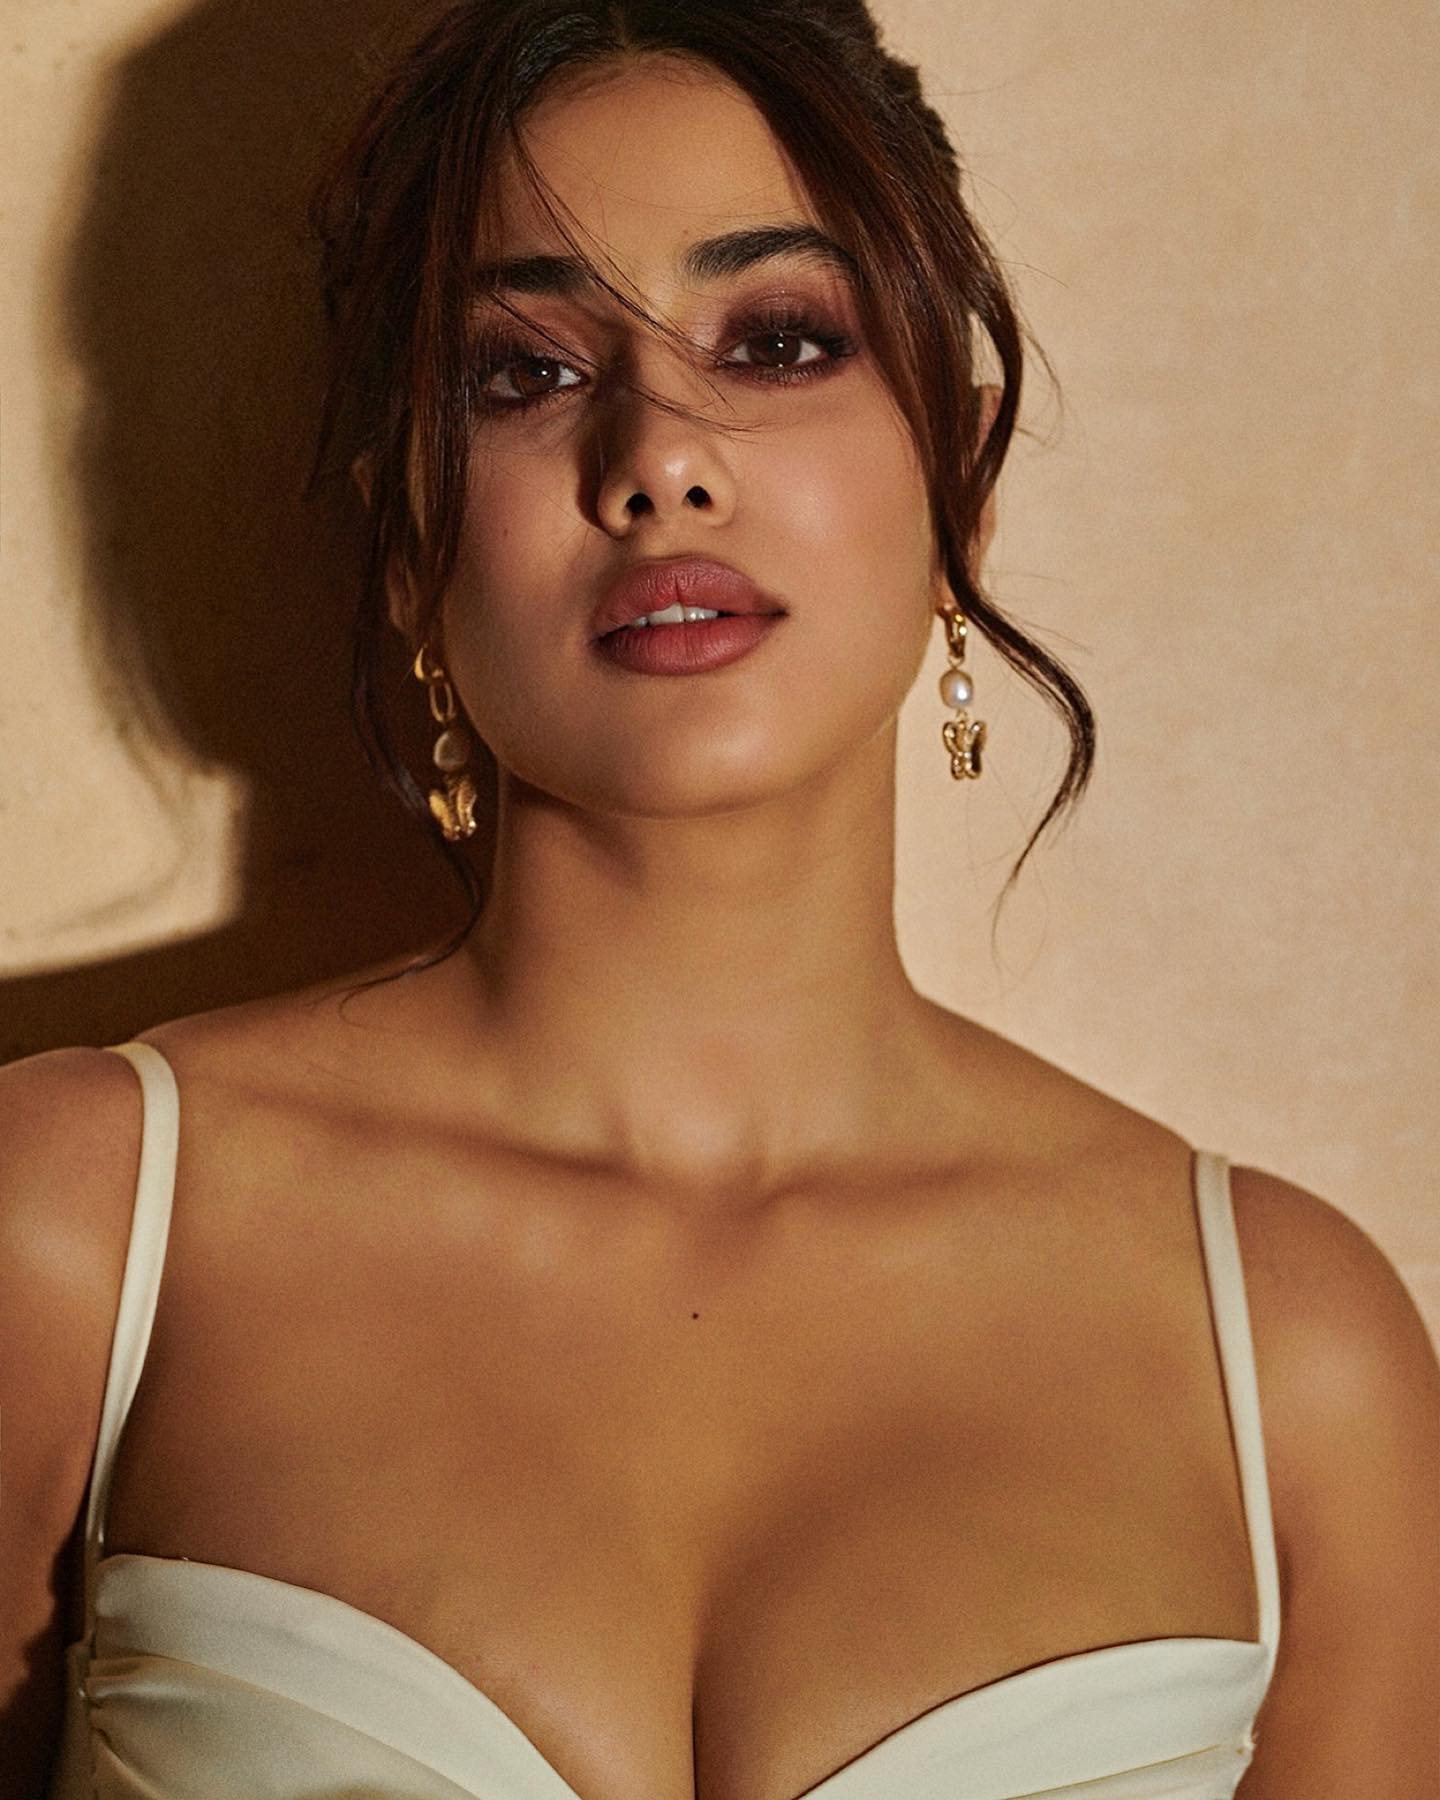 Janhvi Kapoor Makes Things Steamy in White Bodycon Short Dress With Plunging Neckline - Too Hot to Handle